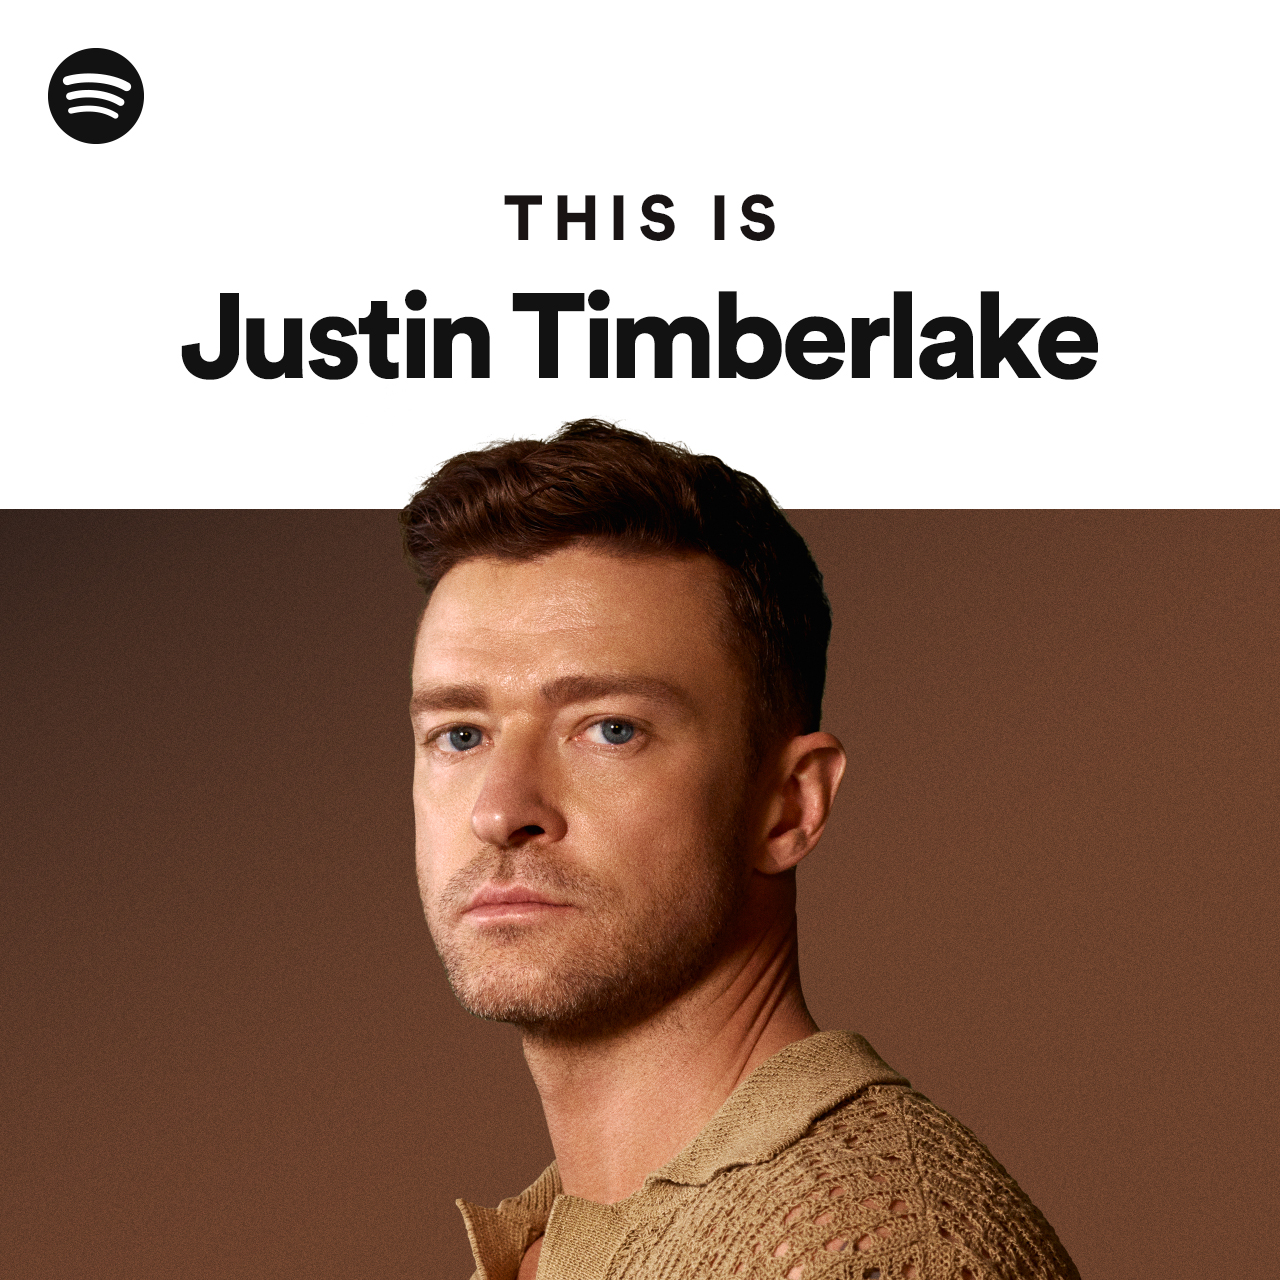 This Is Justin Timberlake by spotify Spotify Playlist